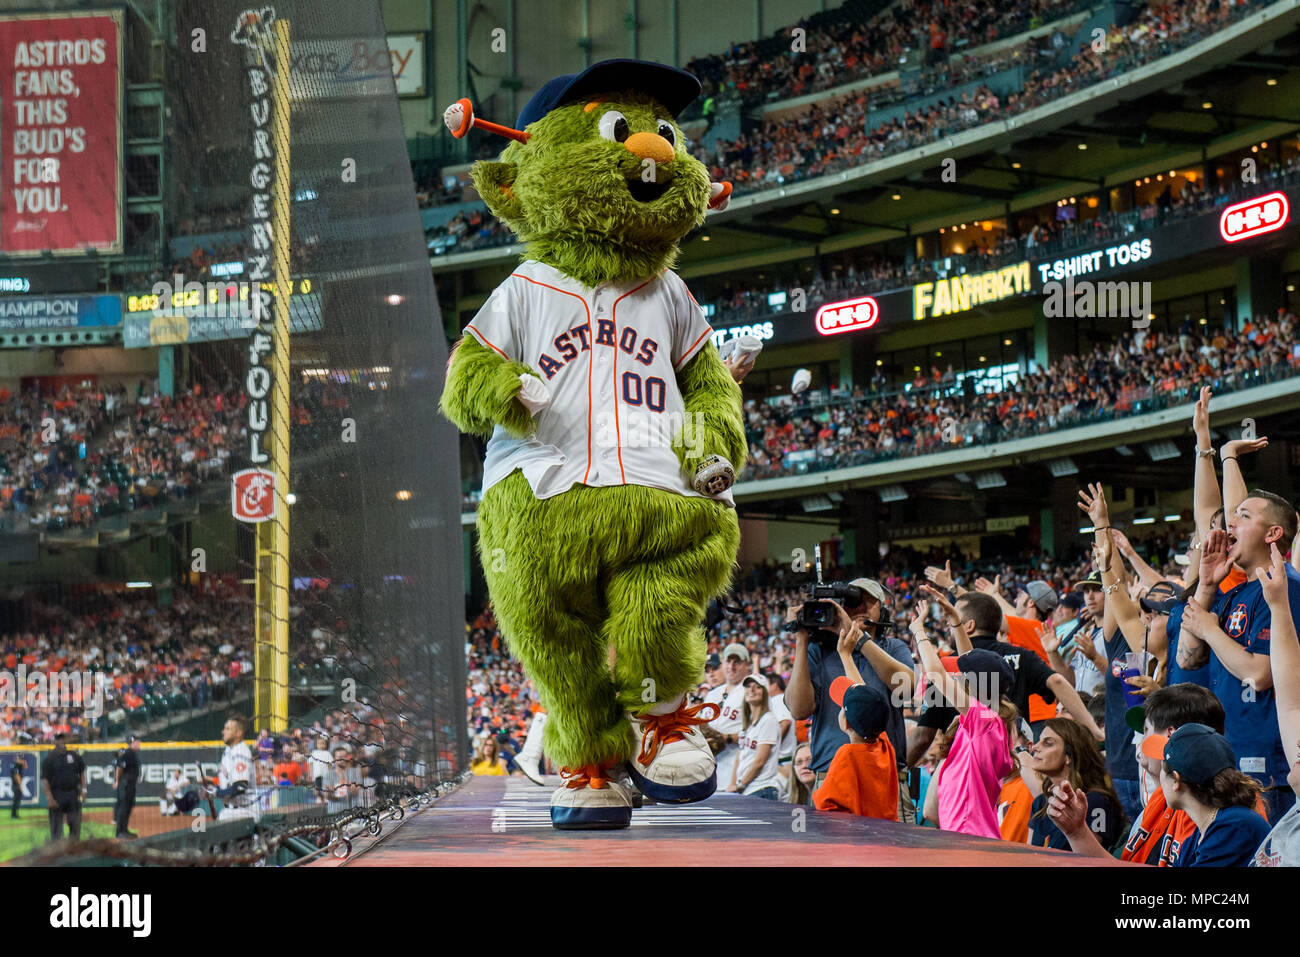 Houston, TX, USA. 19th May, 2018. Houston Astros mascot Orbit during a Major League Baseball game between the Houston Astros and the Cleveland Indians at Minute Maid Park in Houston, TX. Cleveland won the game 5 to 4.Trask Smith/CSM/Alamy Live News Stock Photo